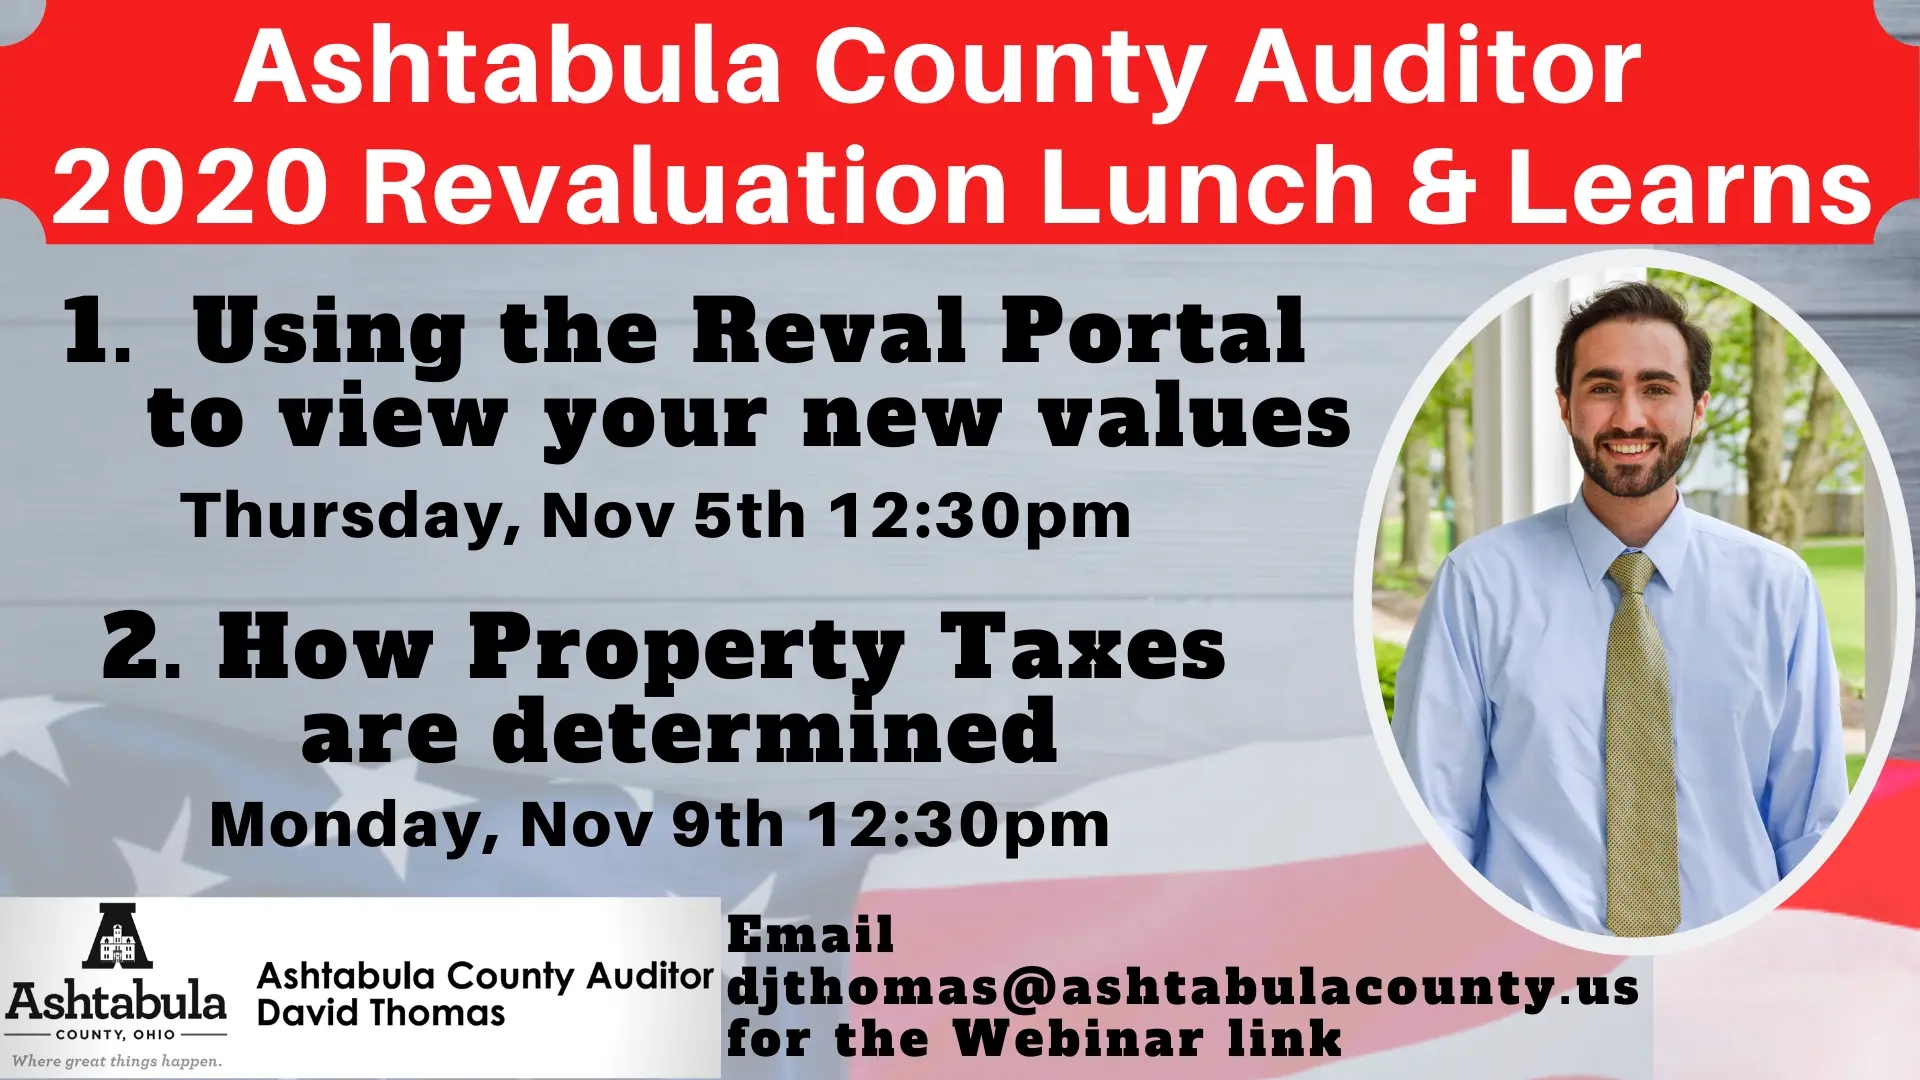 ashtabula county ohio auditor - What is the homestead exemption for the Auditor in Ashtabula County